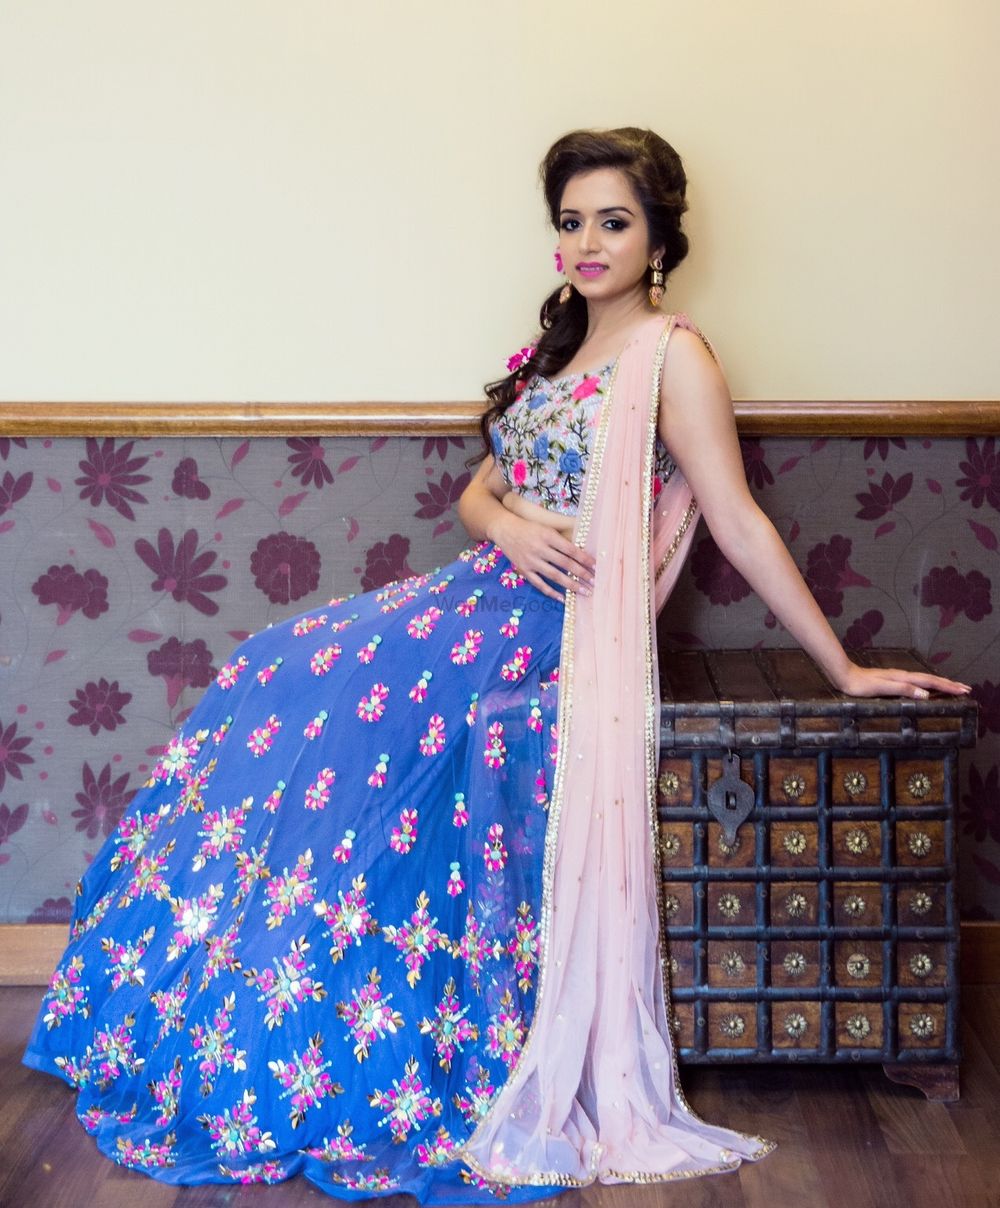 Photo From Bespoke Couture - By Neha & Kriti